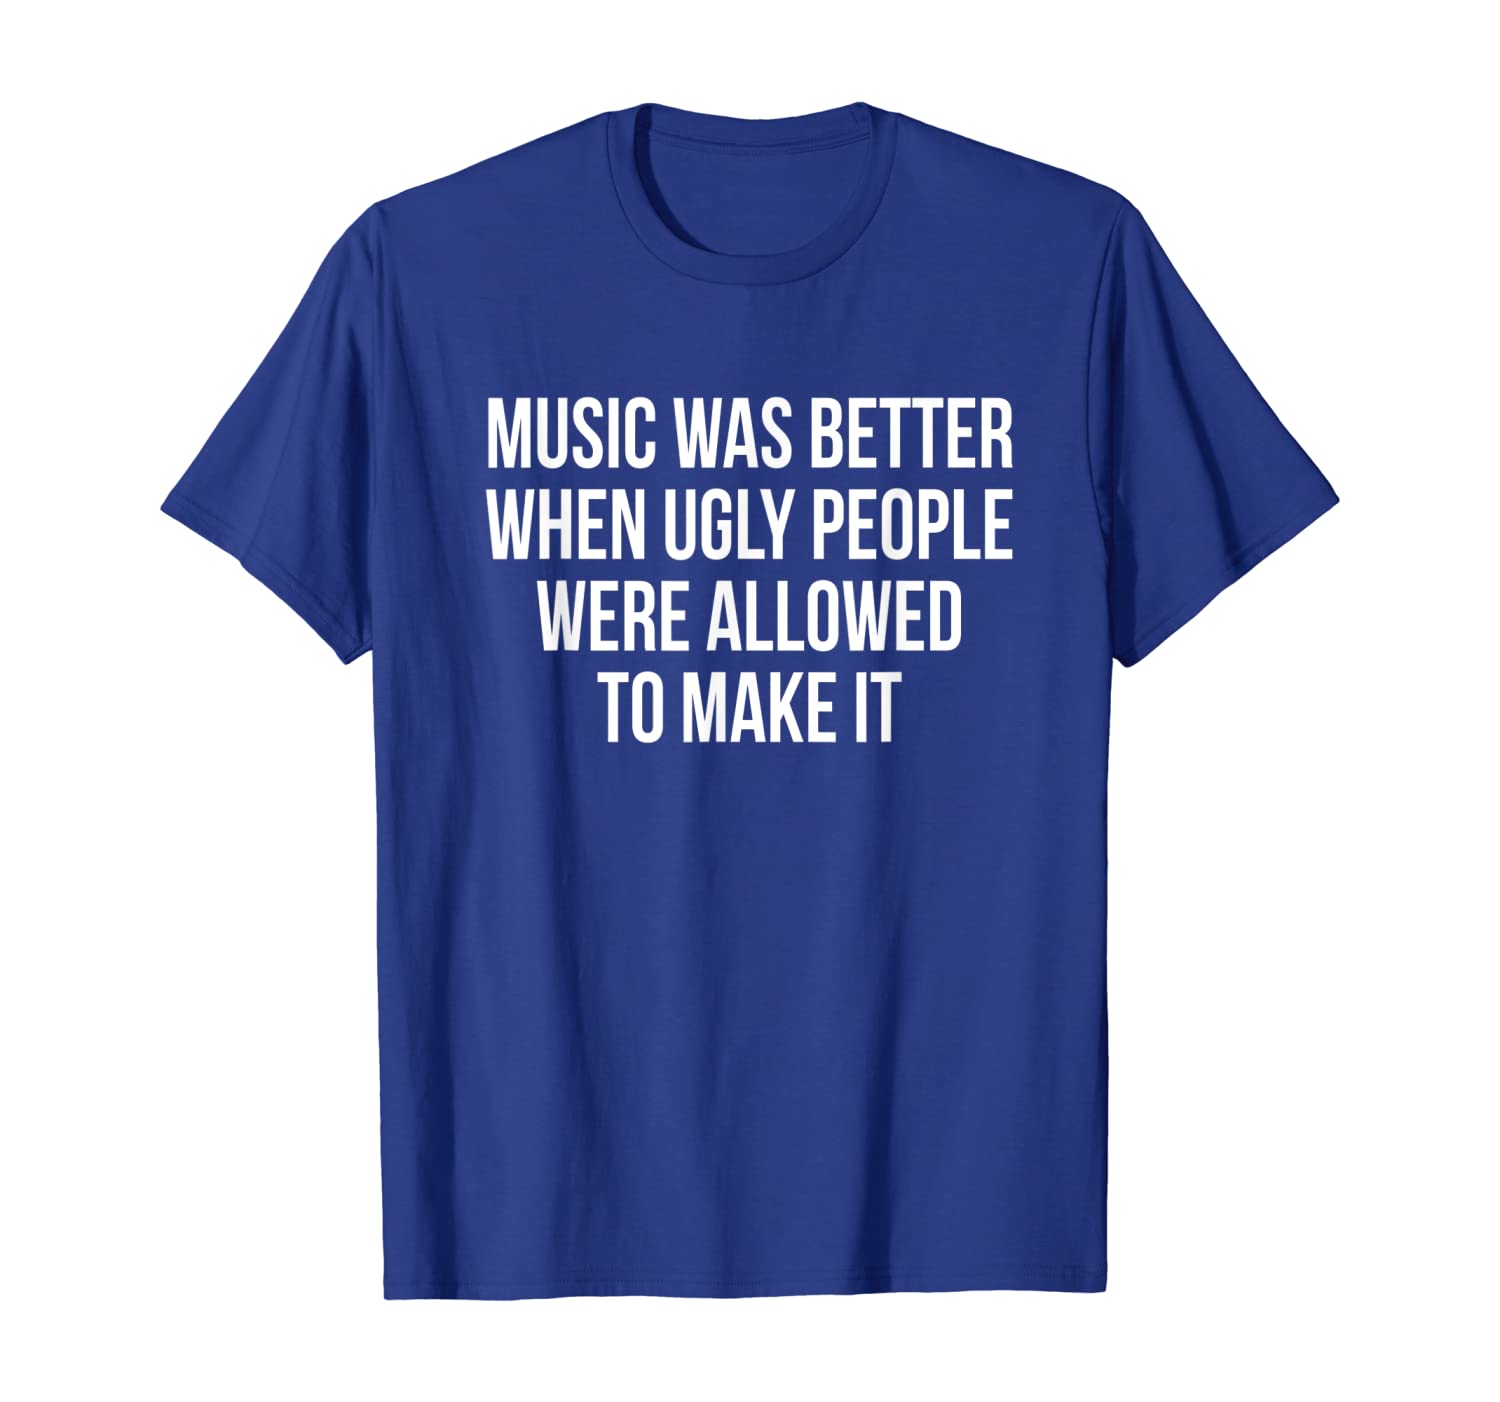 

Music was better when ugly people were allowed to make it T-Shirt, White;black